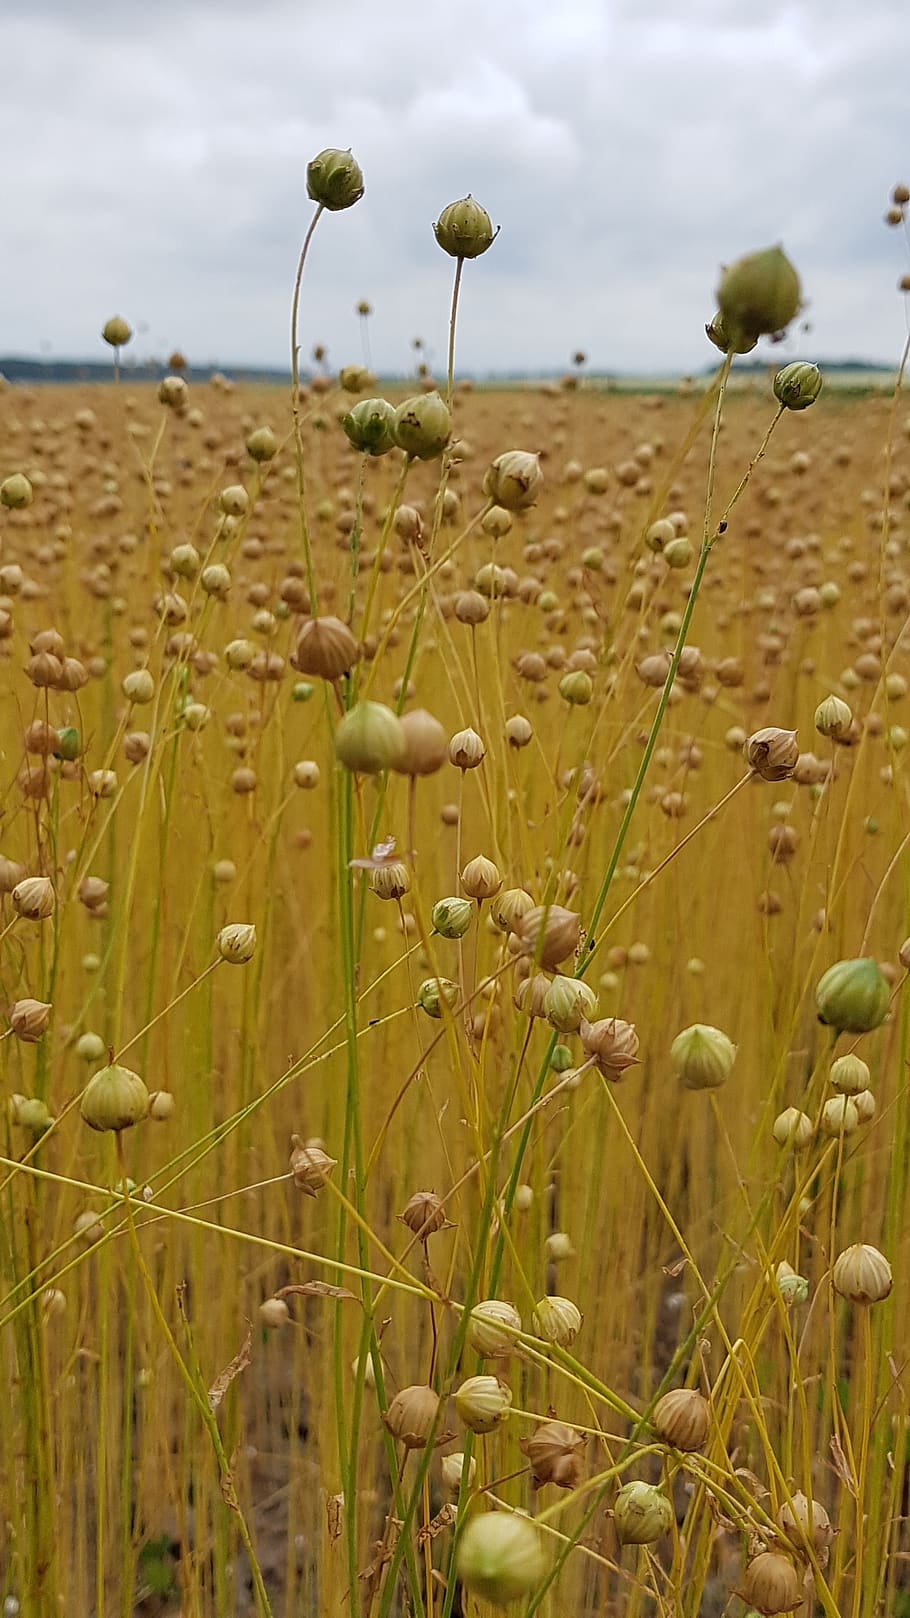 linen, flax, field, arable, linseed oil, lockscreen wallpaper, growth, plant, beauty in nature, nature